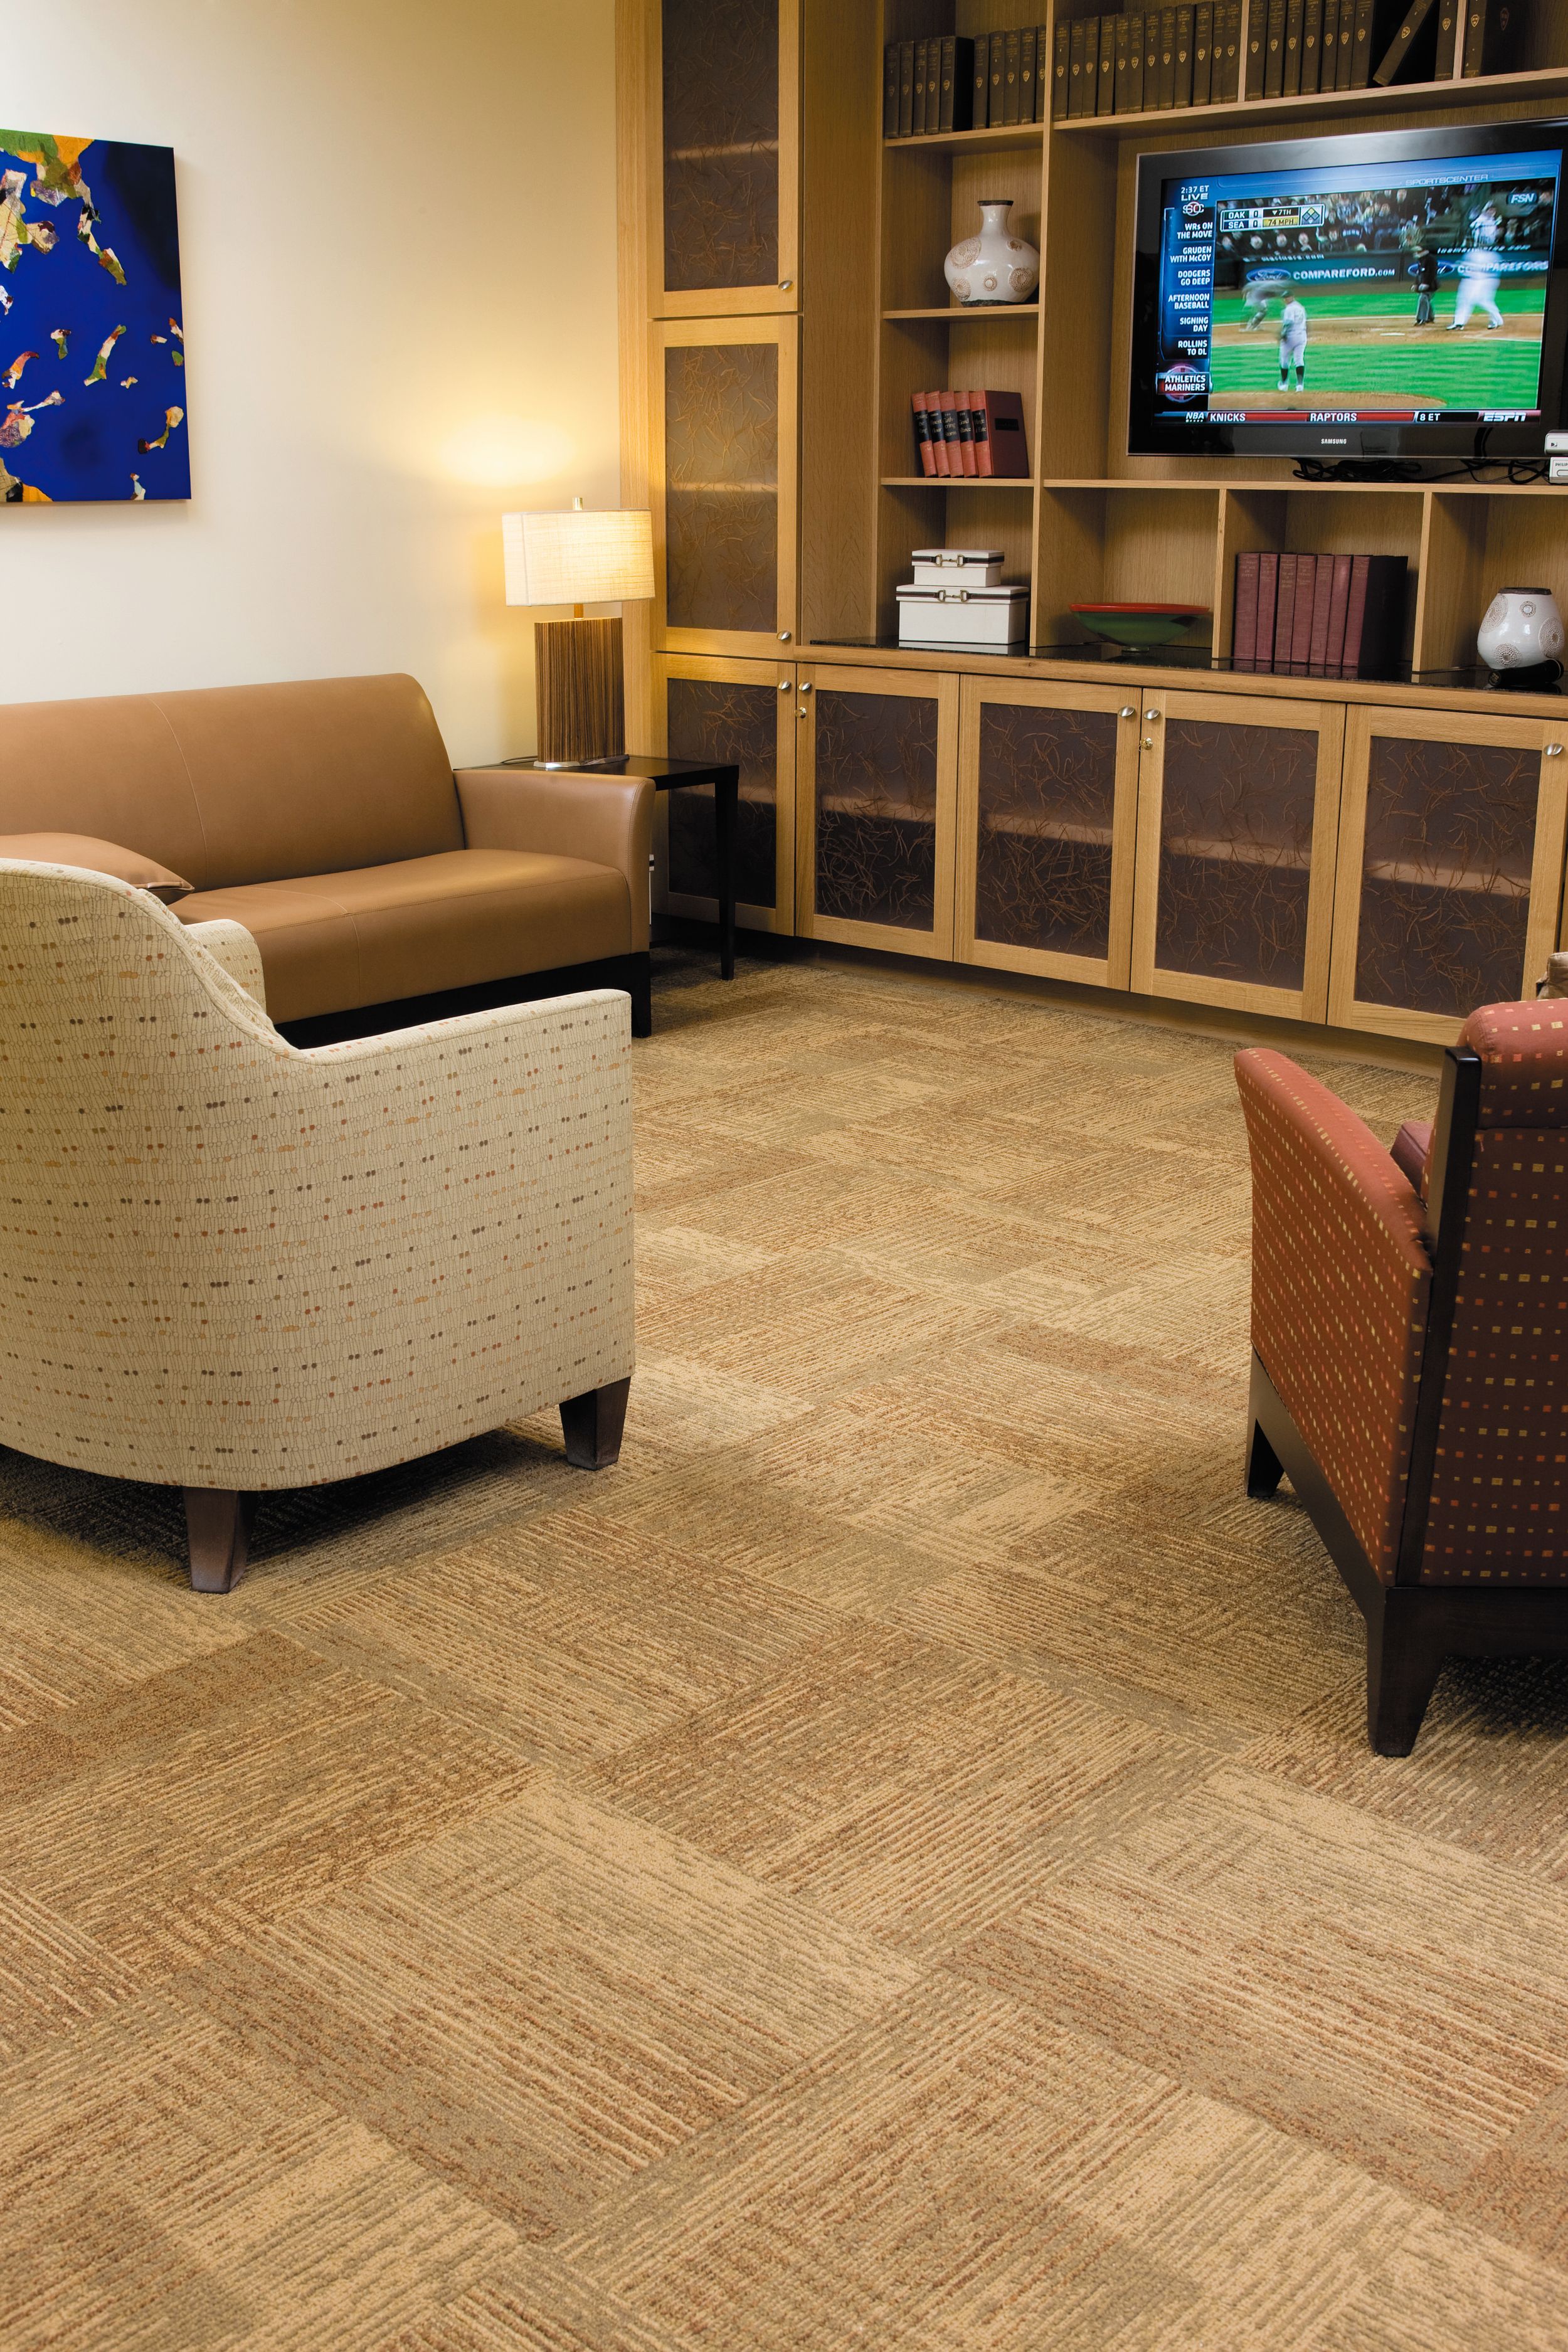 Interface Plain Weave carpet tile in living room area with couch and two chairs imagen número 5